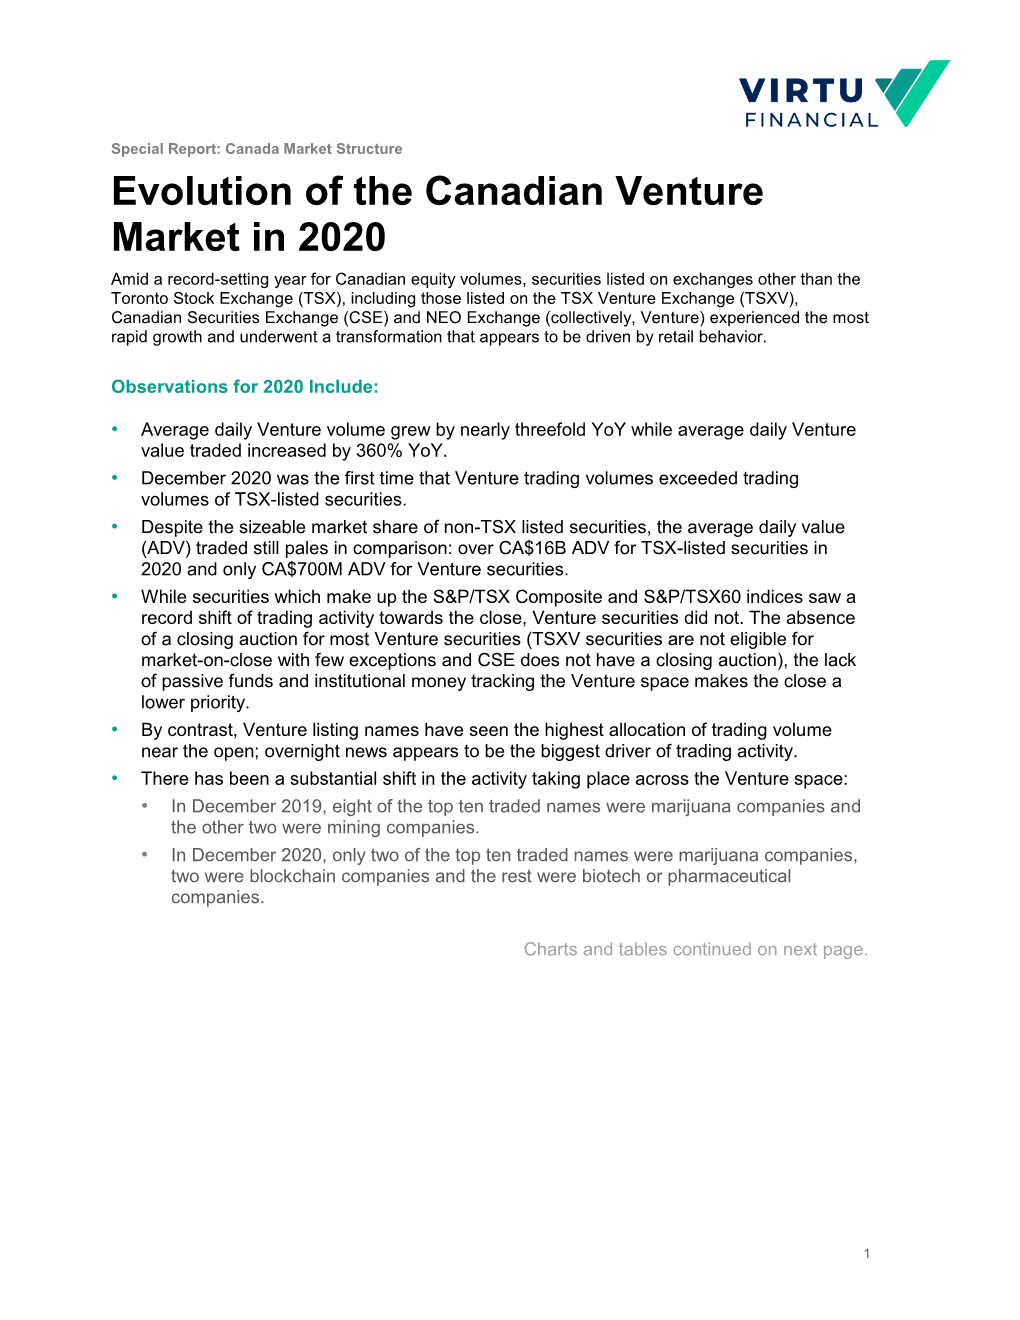 Evolution of the Canadian Venture Market in 2020